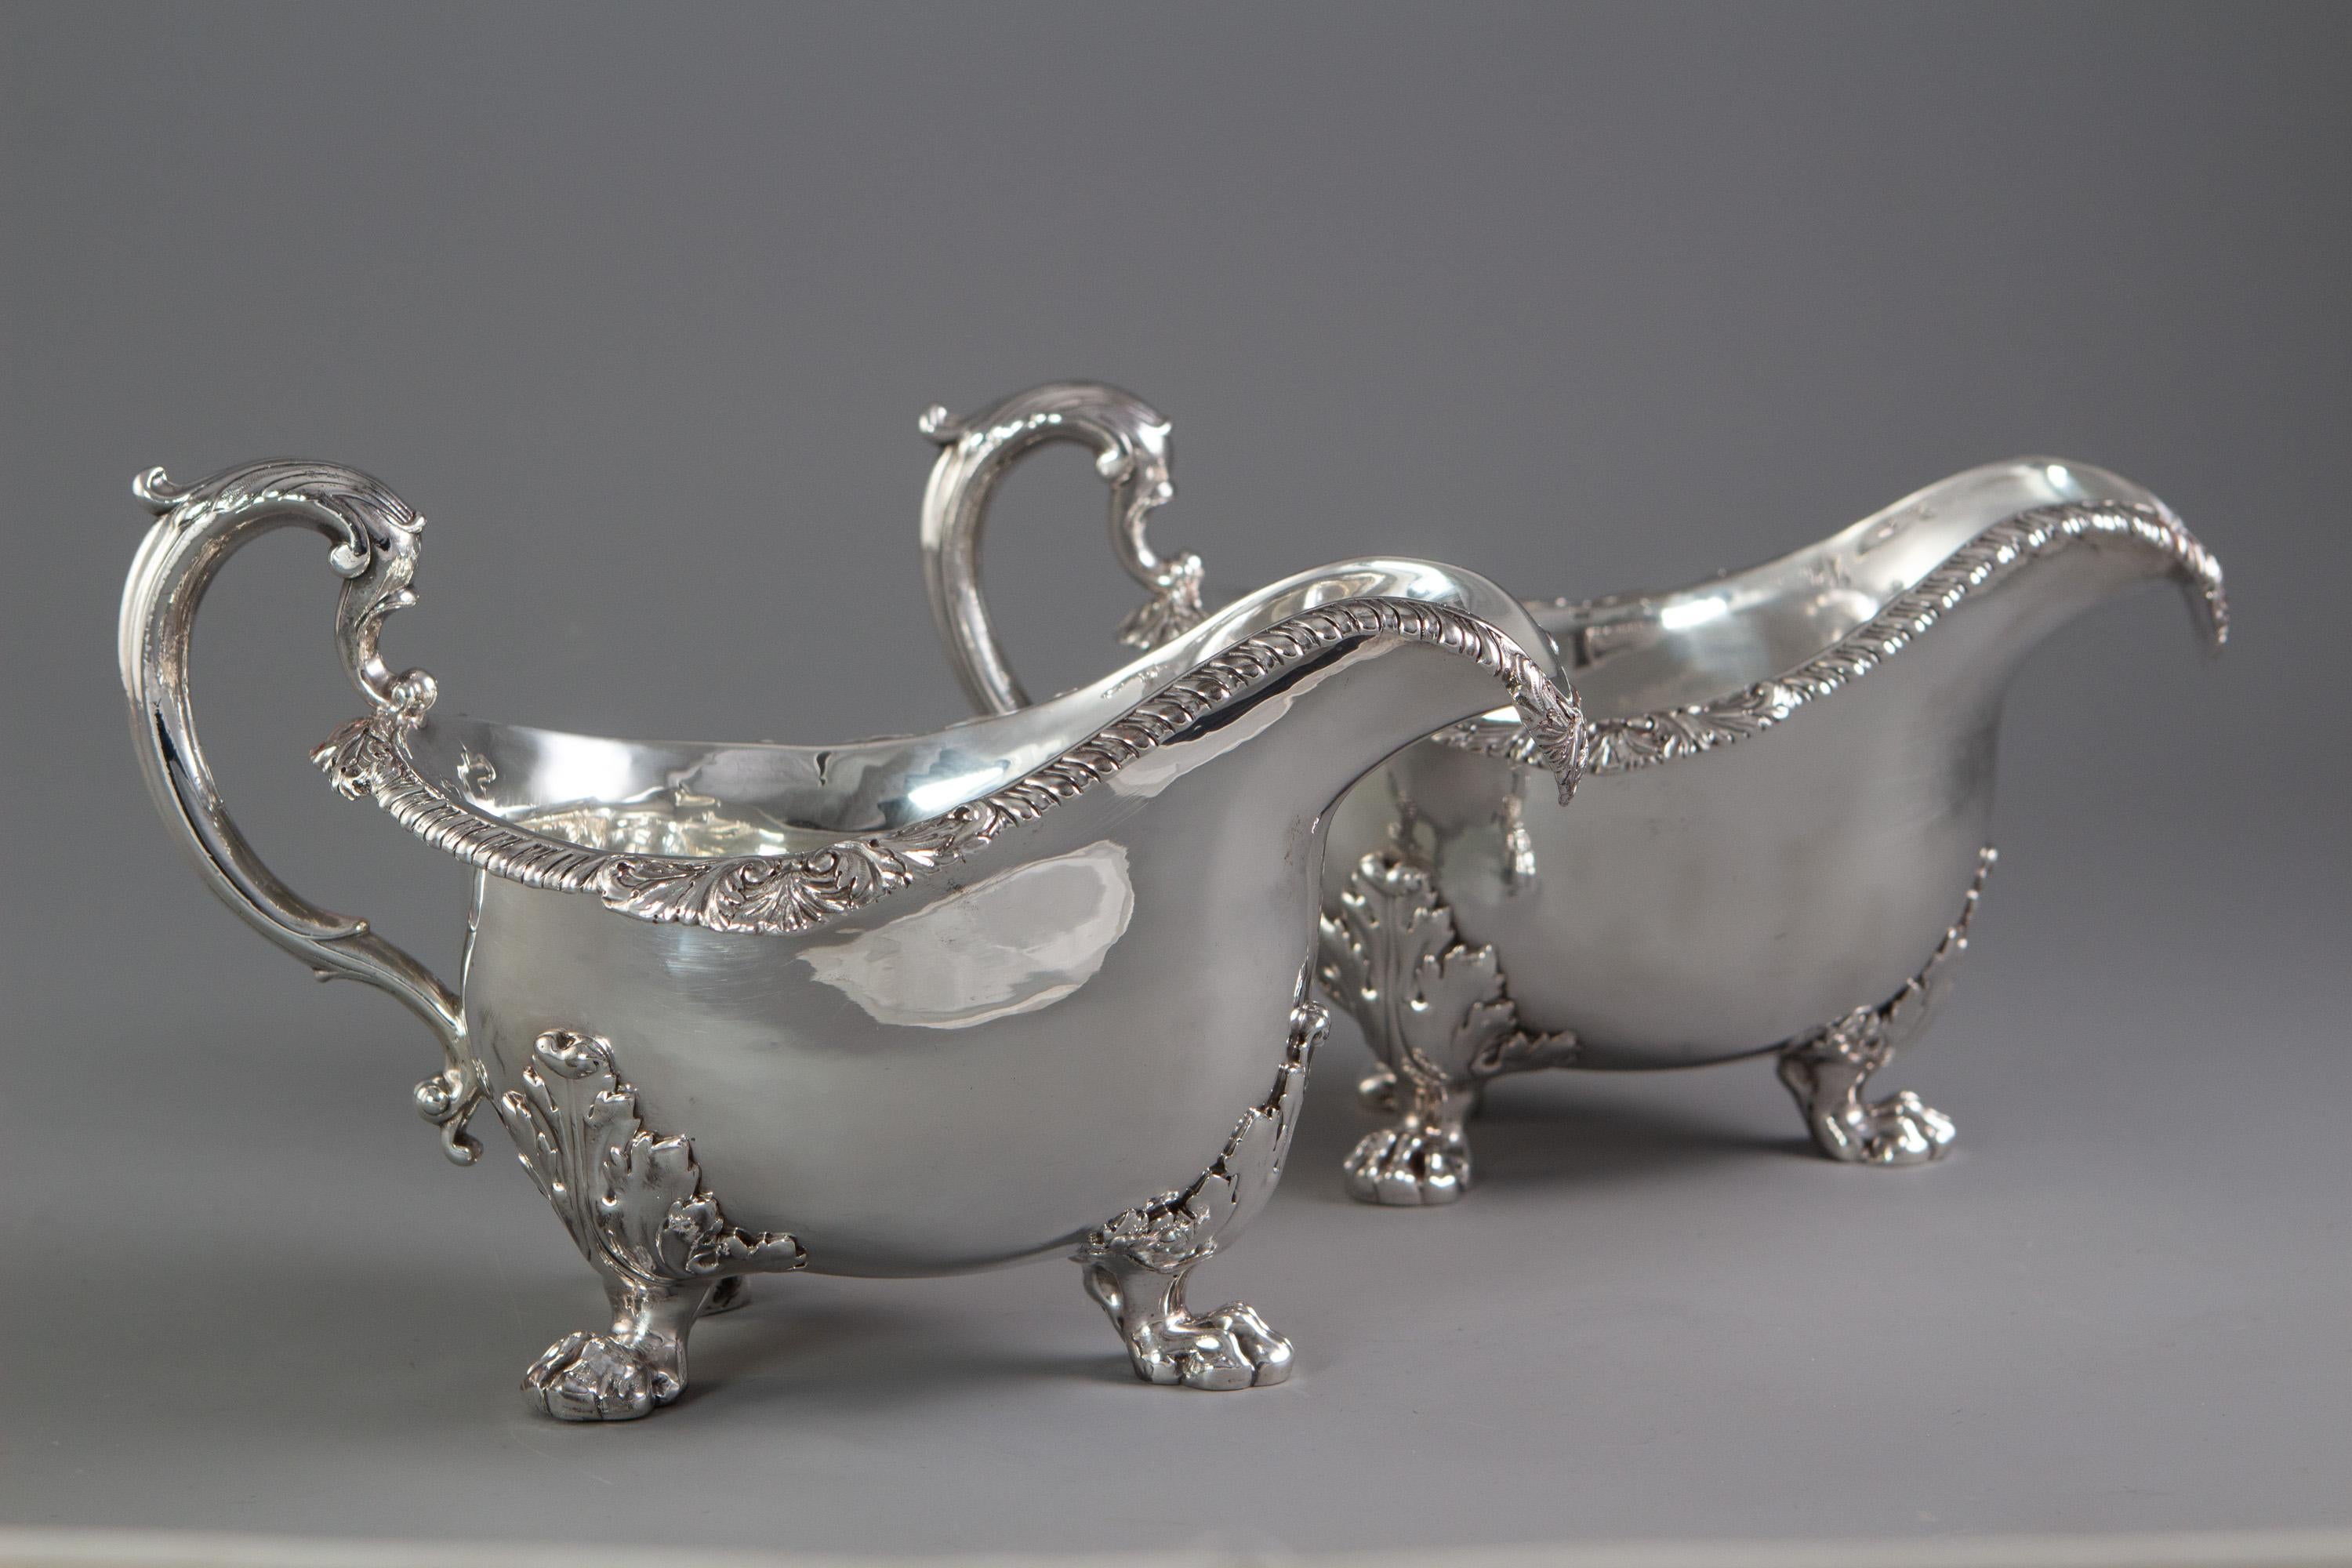 This rare pair of silver sauce boats are of large bellied oval form with a gadrooned rim sweeping round the down swept pouring lip. C-scroll handle topped with cast acanthus leaf decoration. Standing on three cast, acanthus topped, lion’s paw